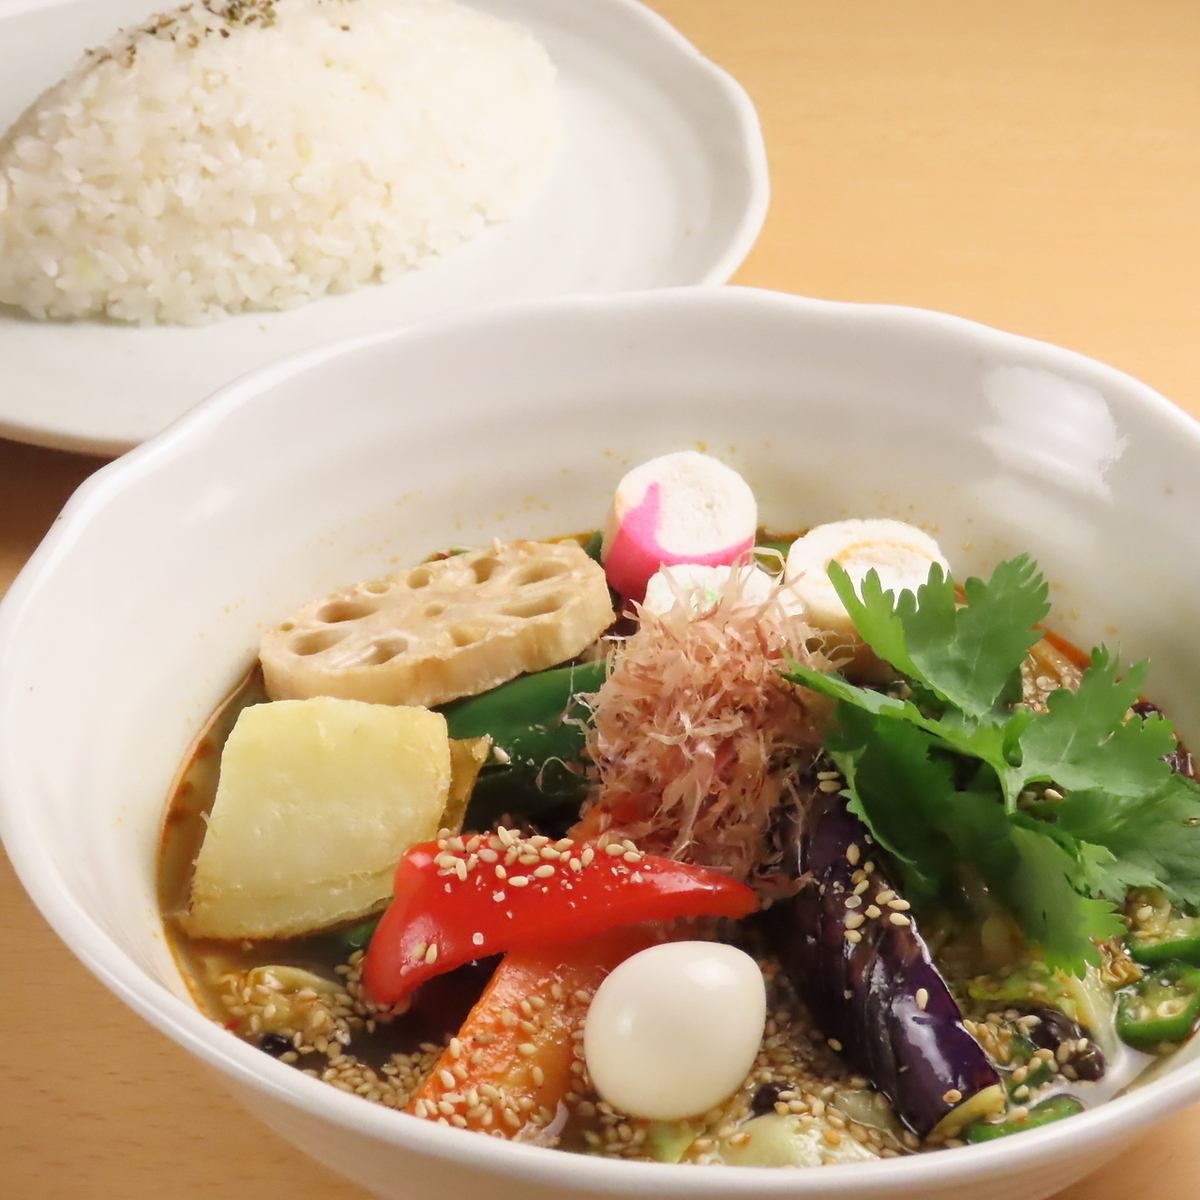 We offer soup curry with nutritional balance based on the same origin of medicine and food! Warm your body and mind♪